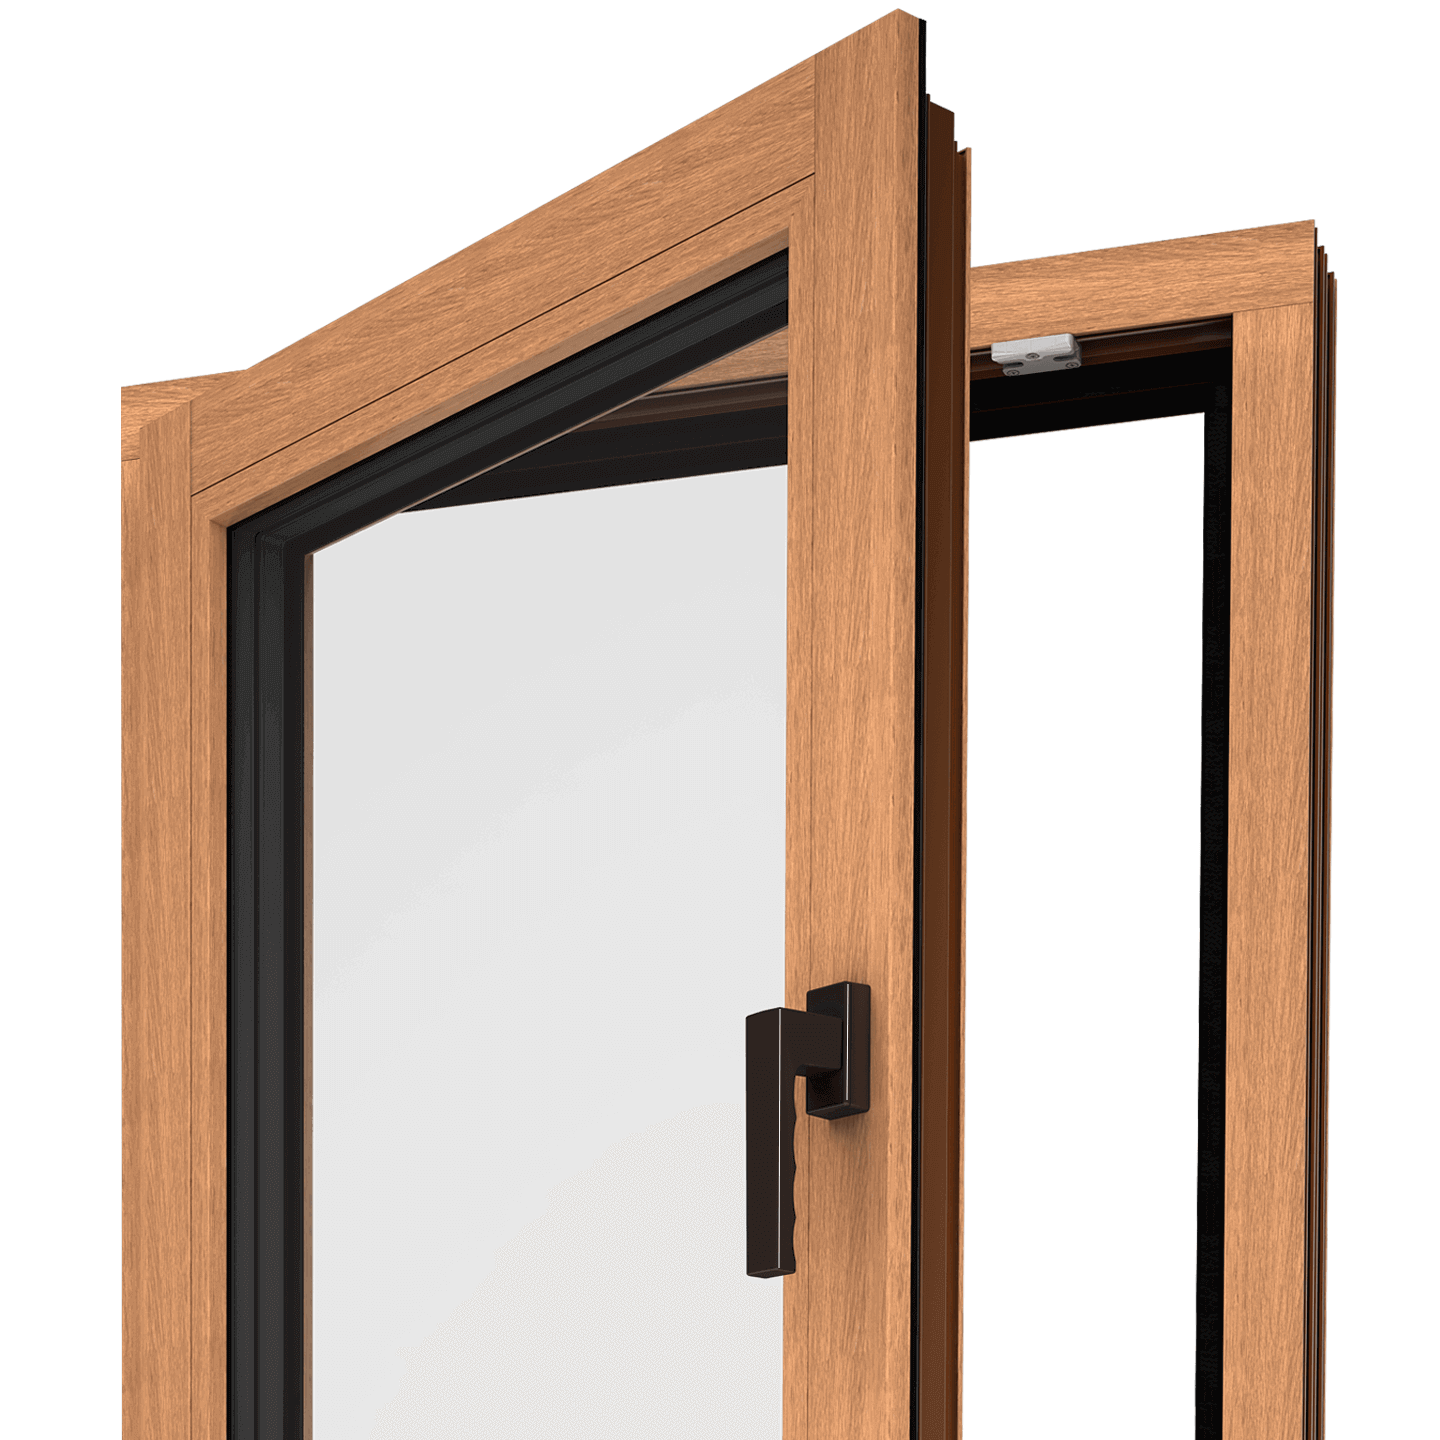 A Wood Look window that resembles a traditional wooden window.